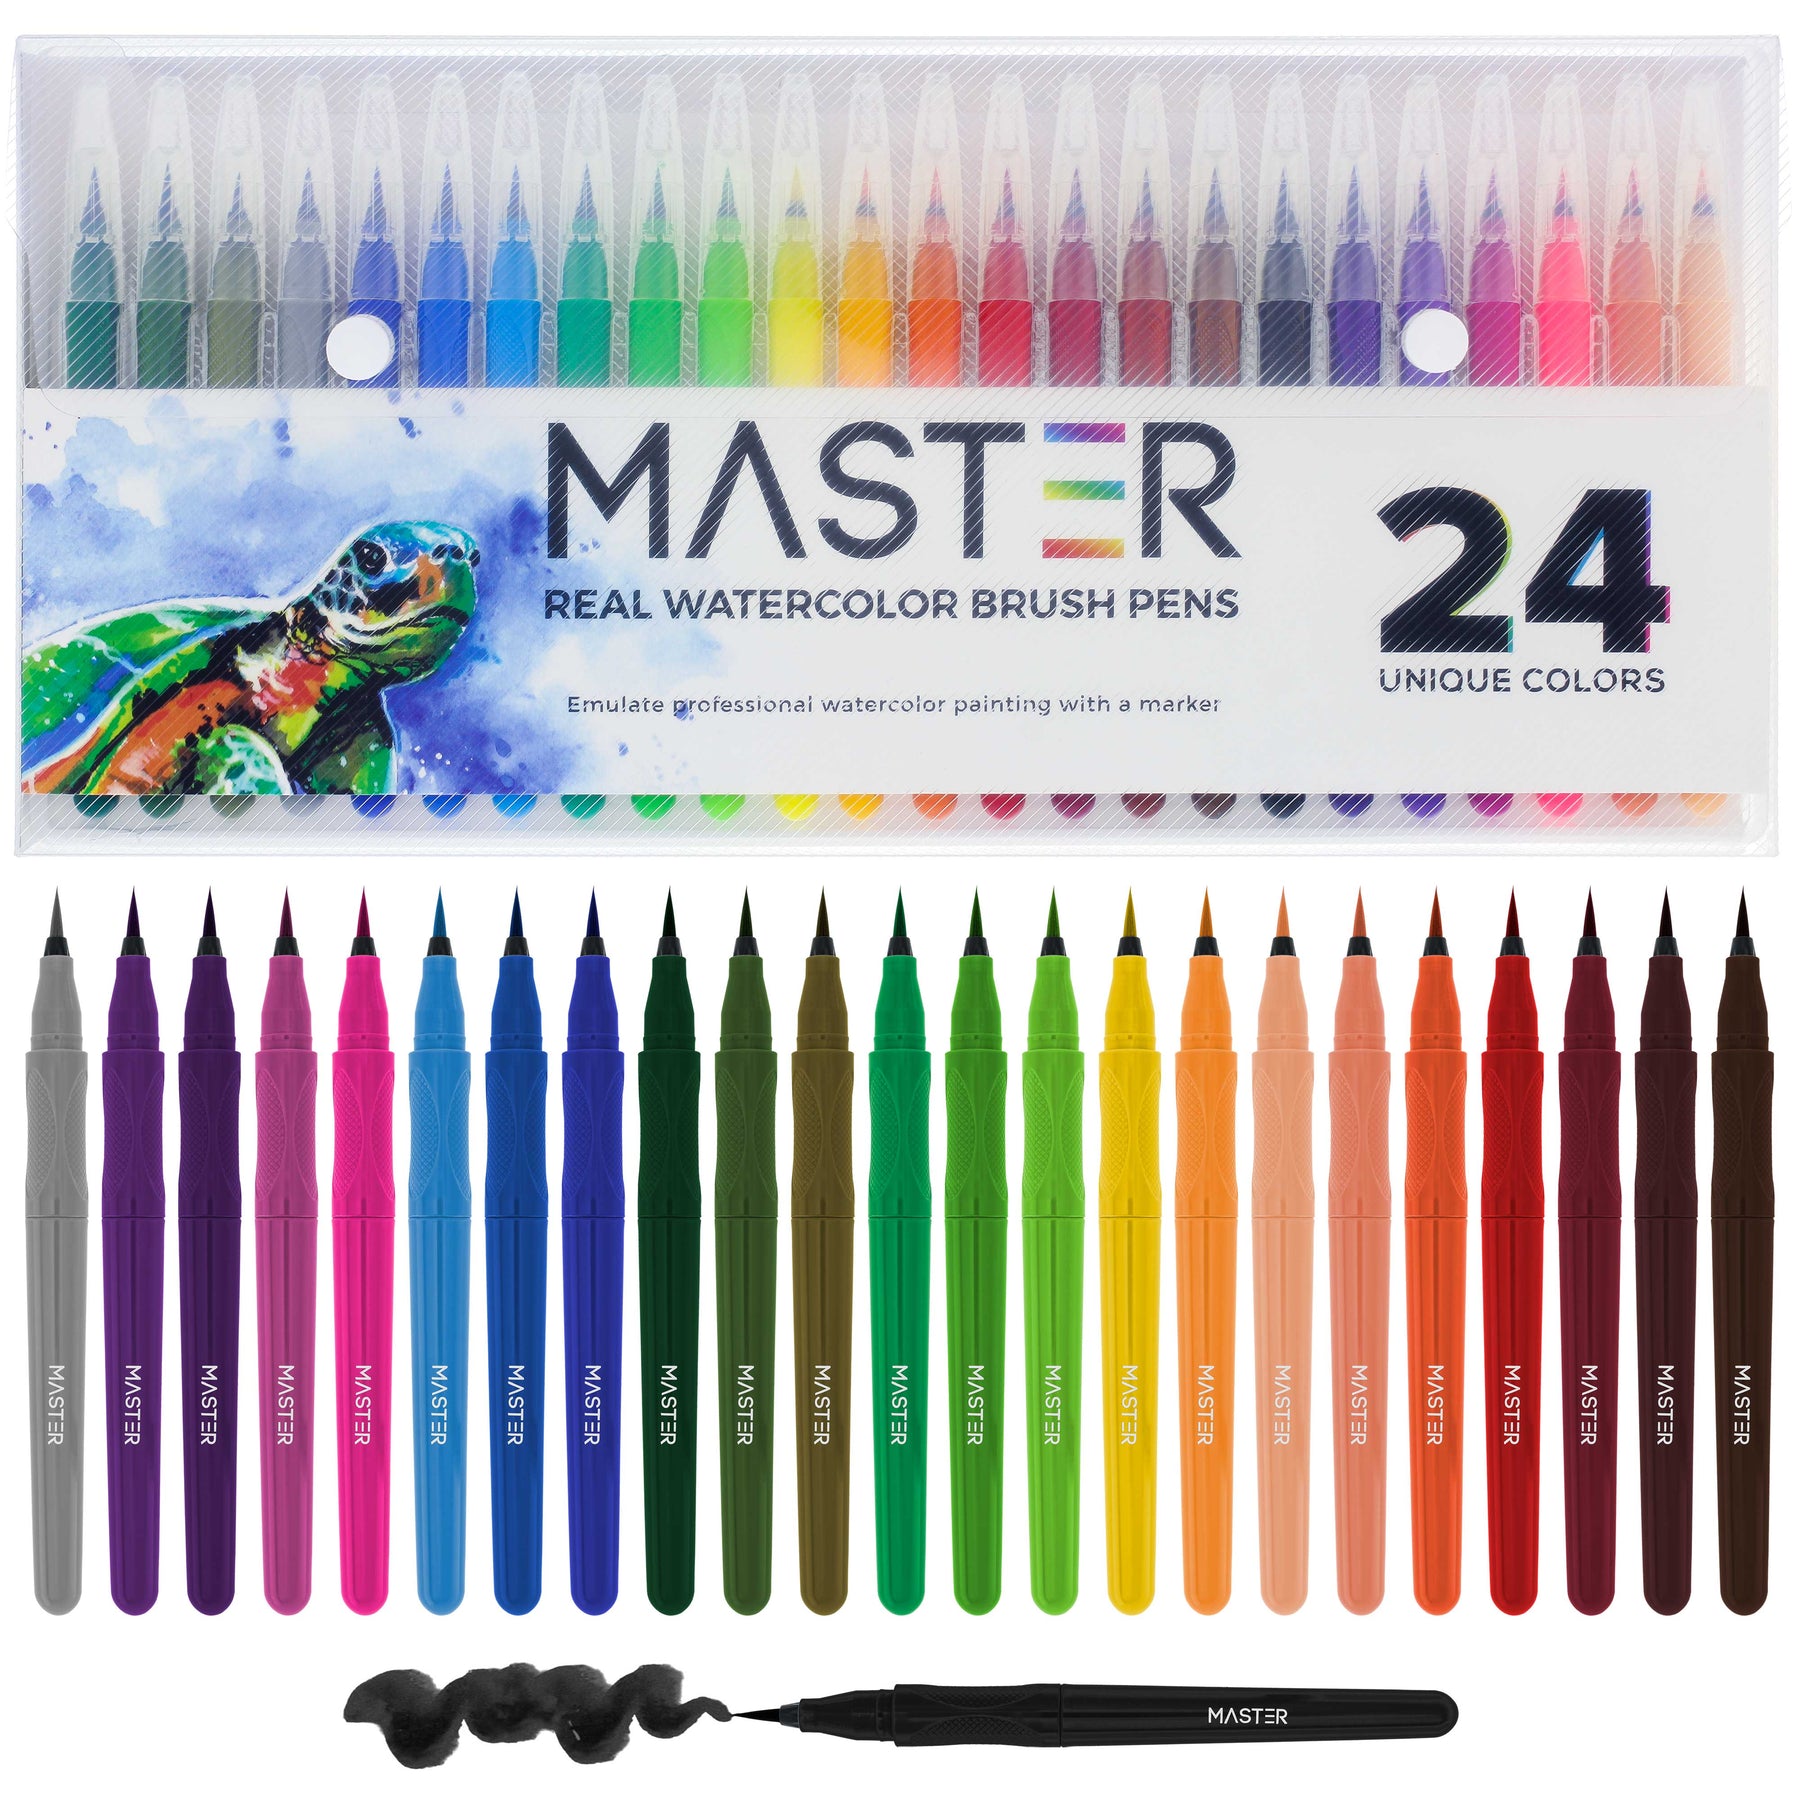 New Watercolor Pens for Adults by AspireColor - Includes 24 Water